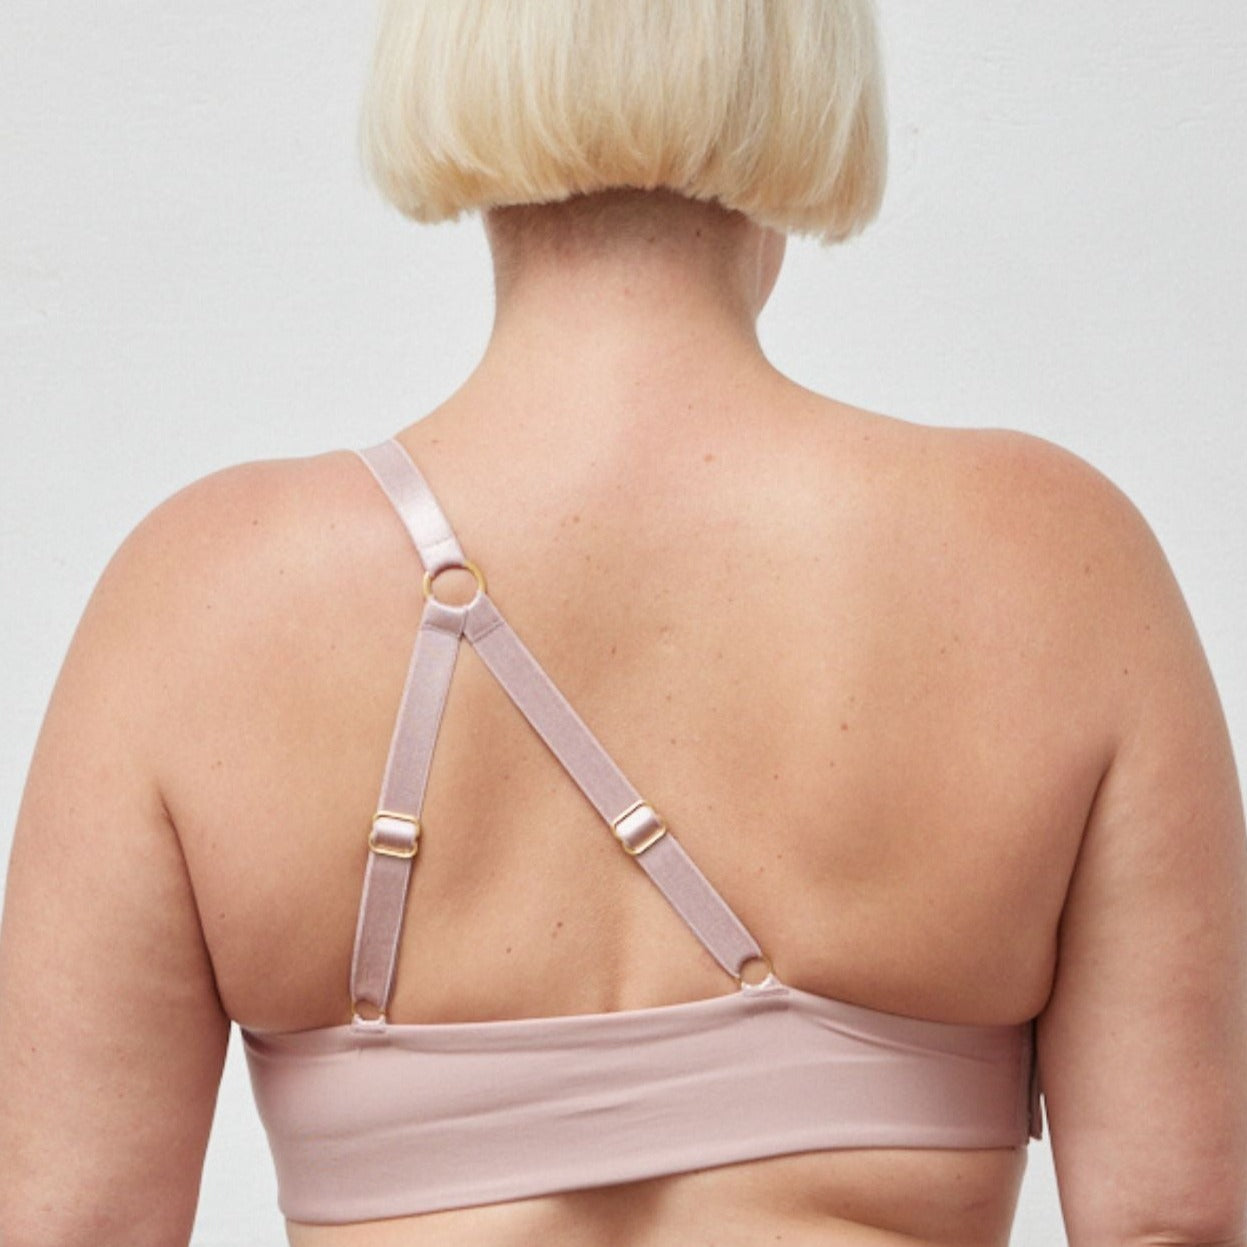 Rachel Right Unilateral Molded Cup Sling Bra in Blush | A molded cup bra with a side closure and intricate strap design on the back, providing stability and contours your curves for a snug and secure fit | By AnaOno